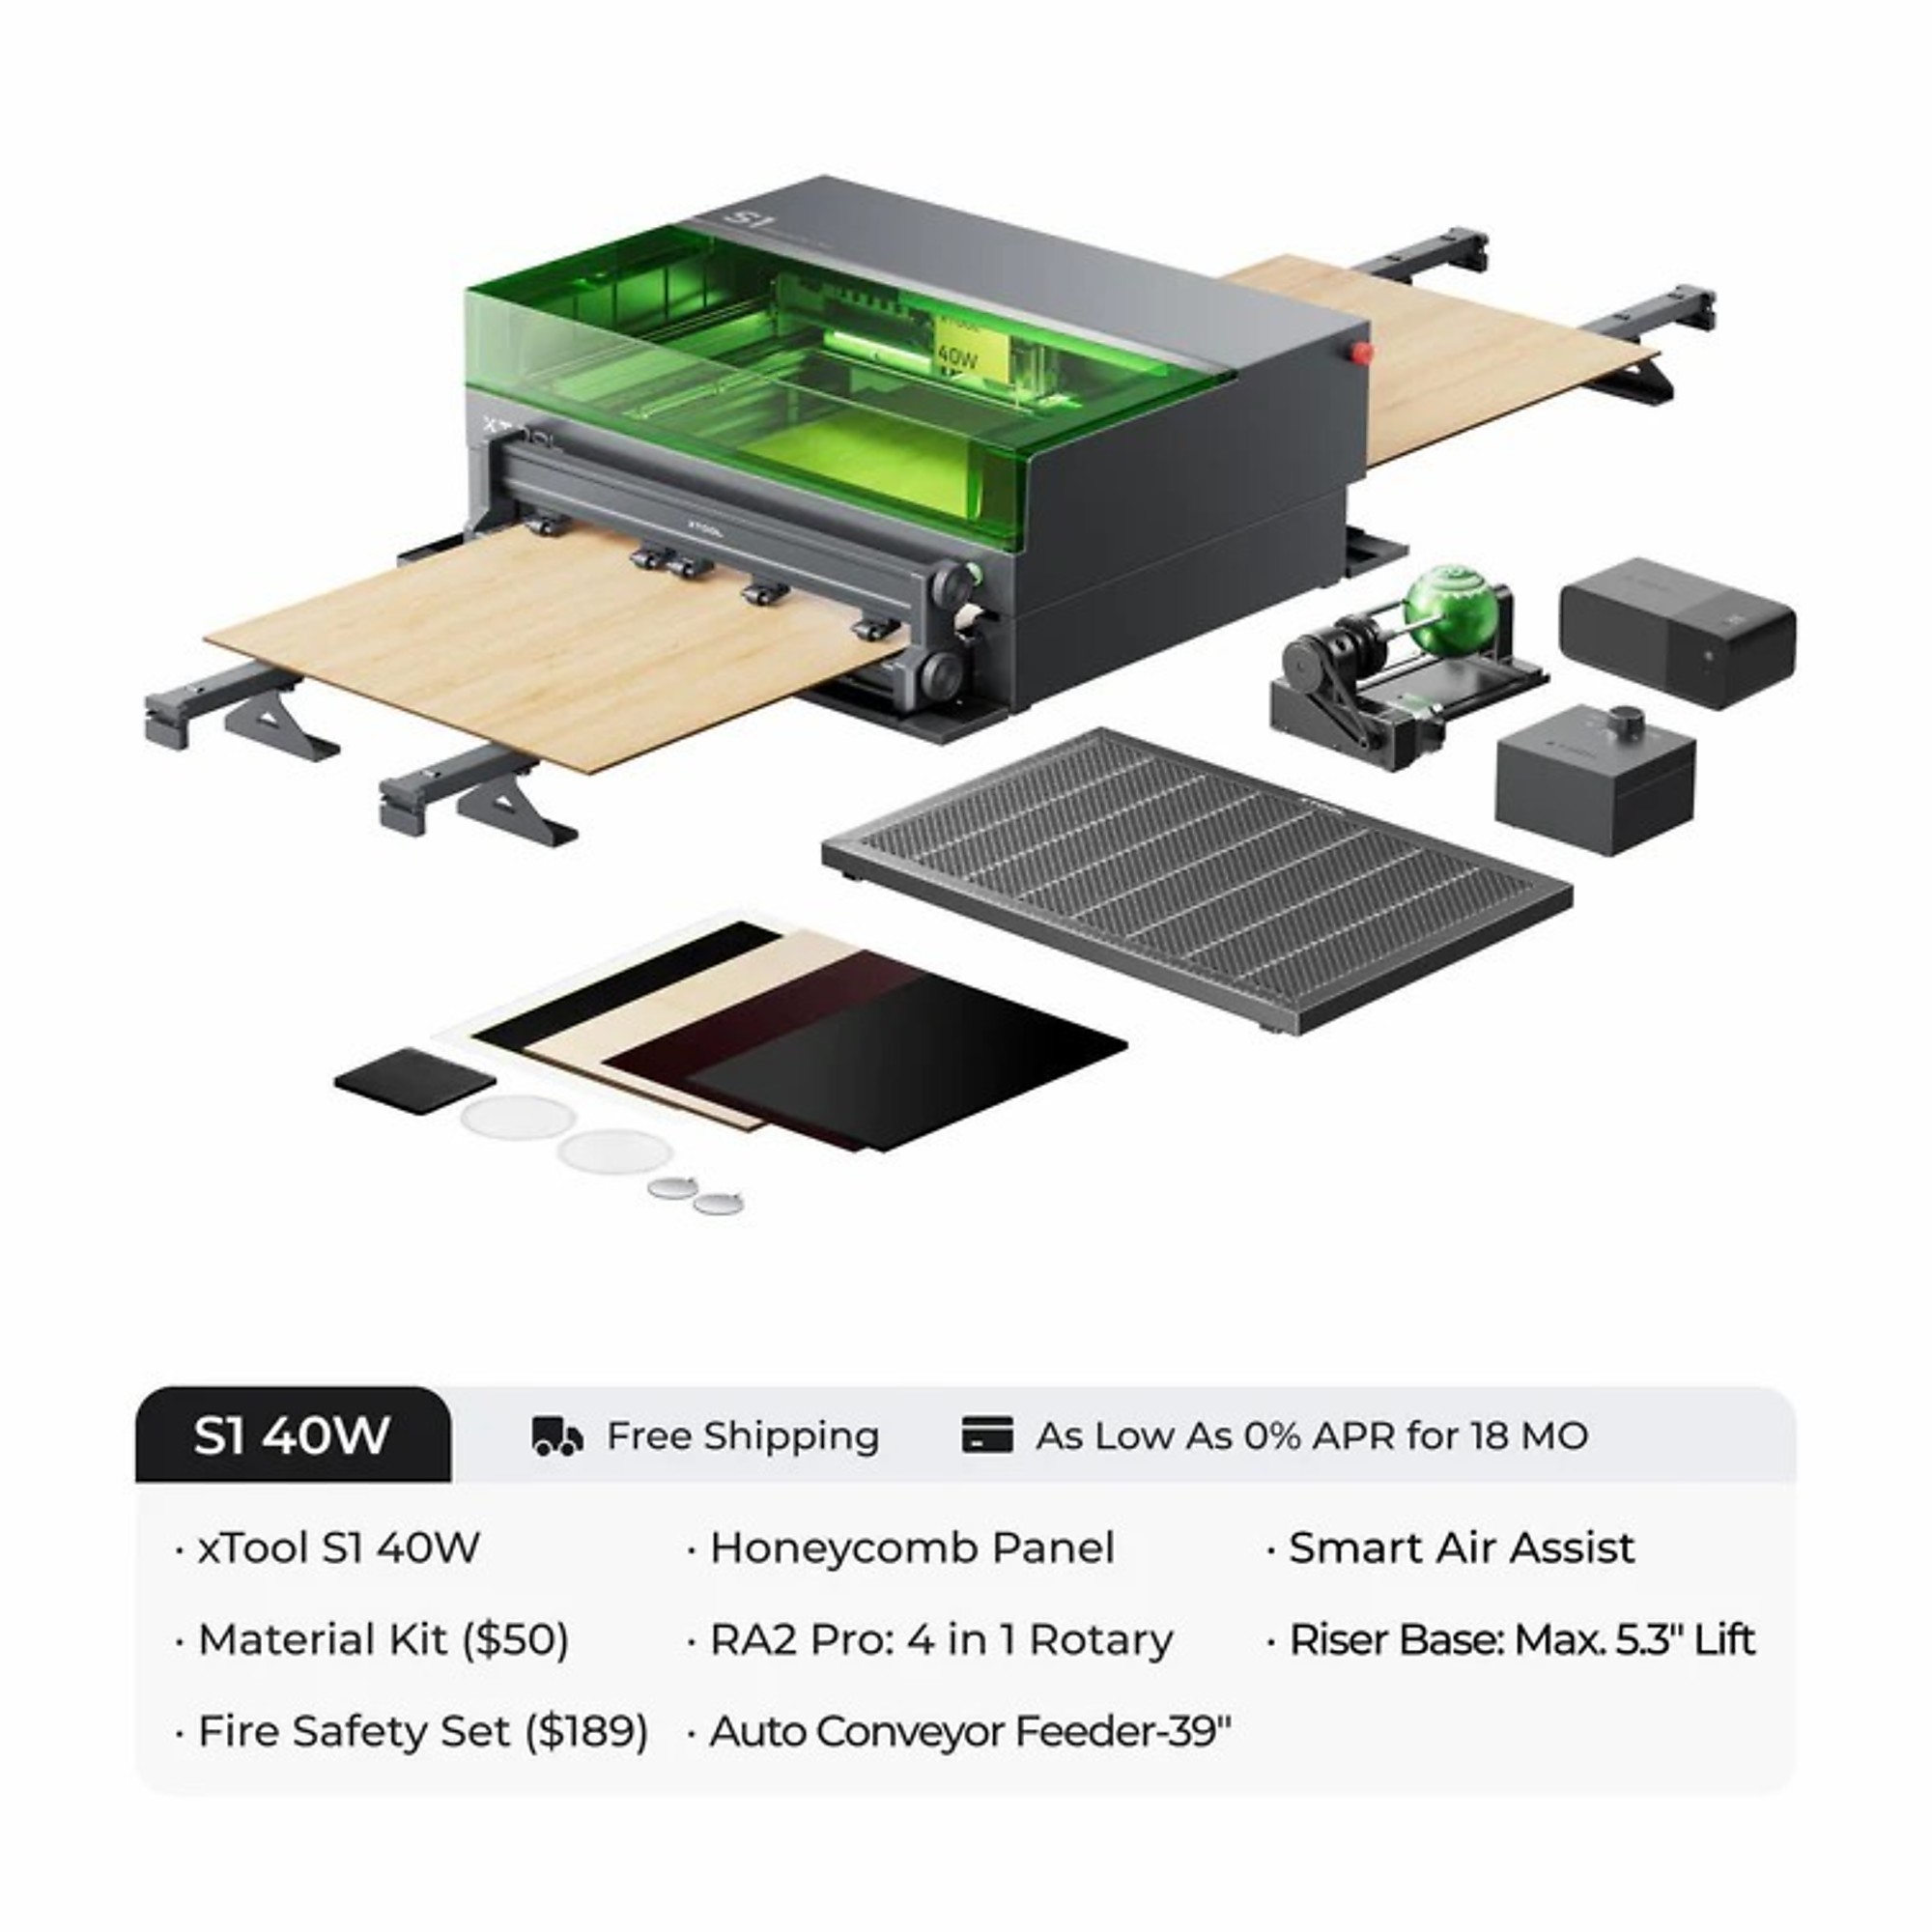 xTool, Laser Cutter and Engraver, 40w, 600mm/s,, Working Width 25.98 in, Working Length 33.86 in, Laser Power 40 W, Model P1030508-P5010290-P5010279-